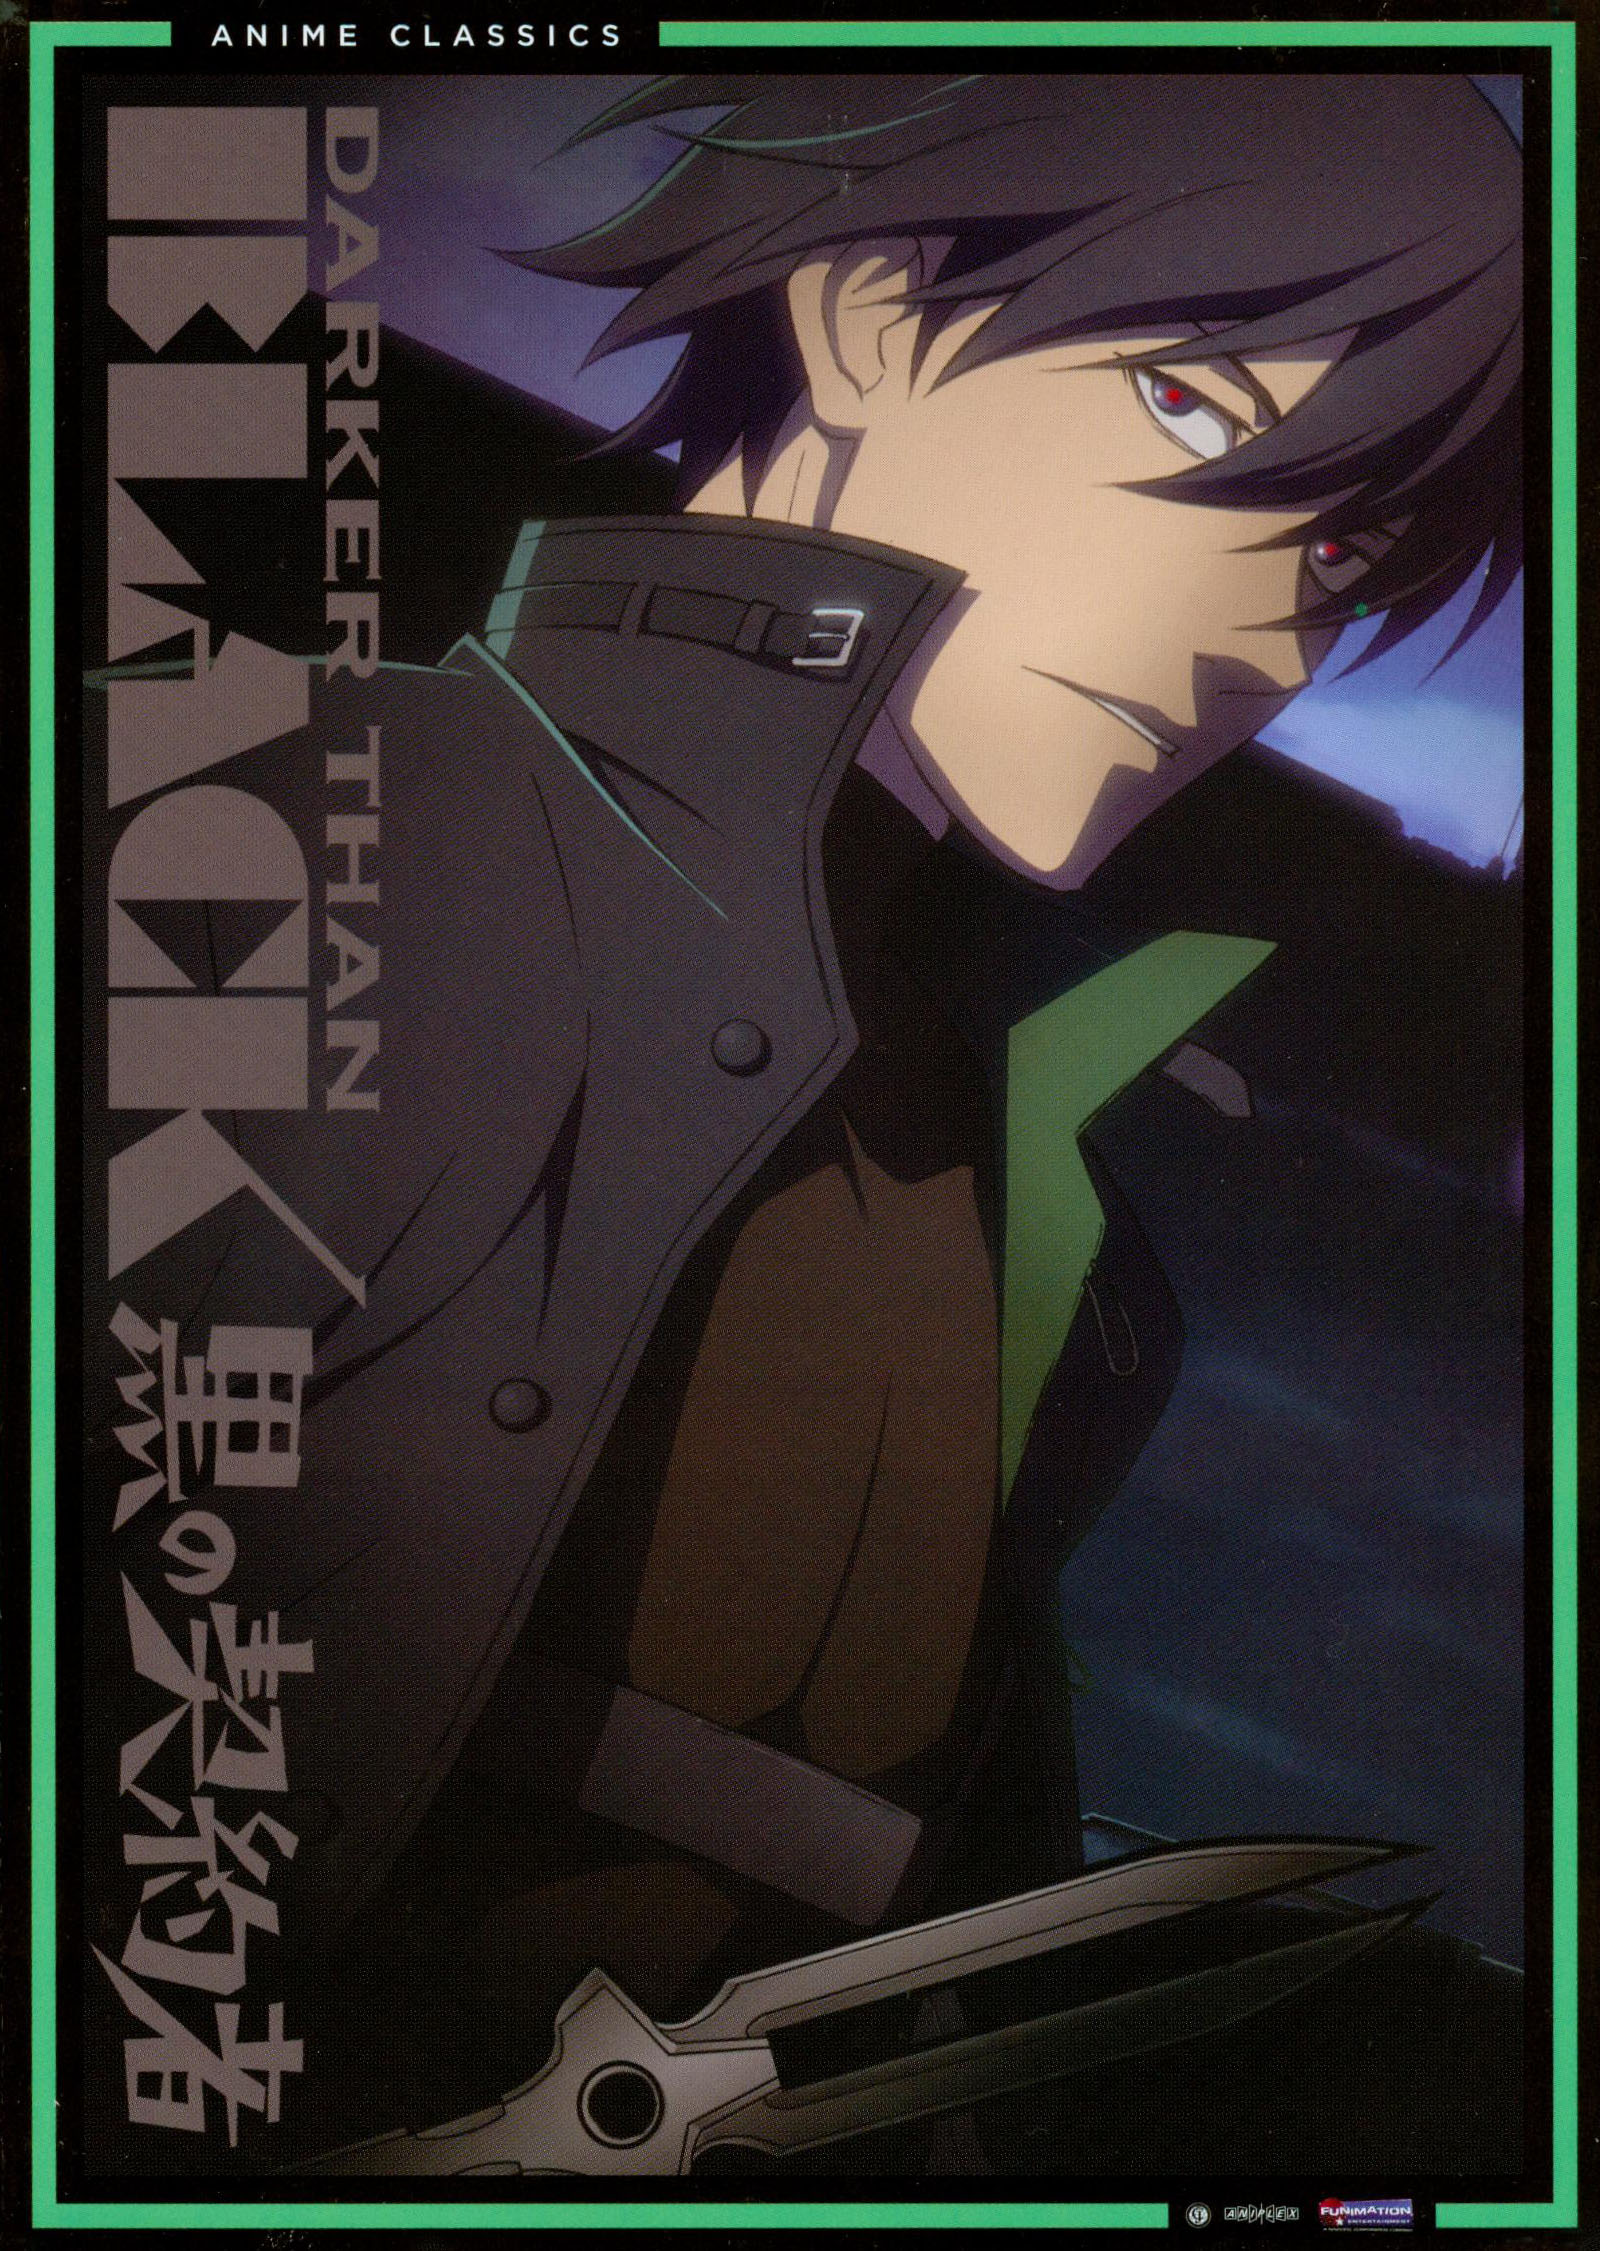 A Review of Darker Than Black, Season One